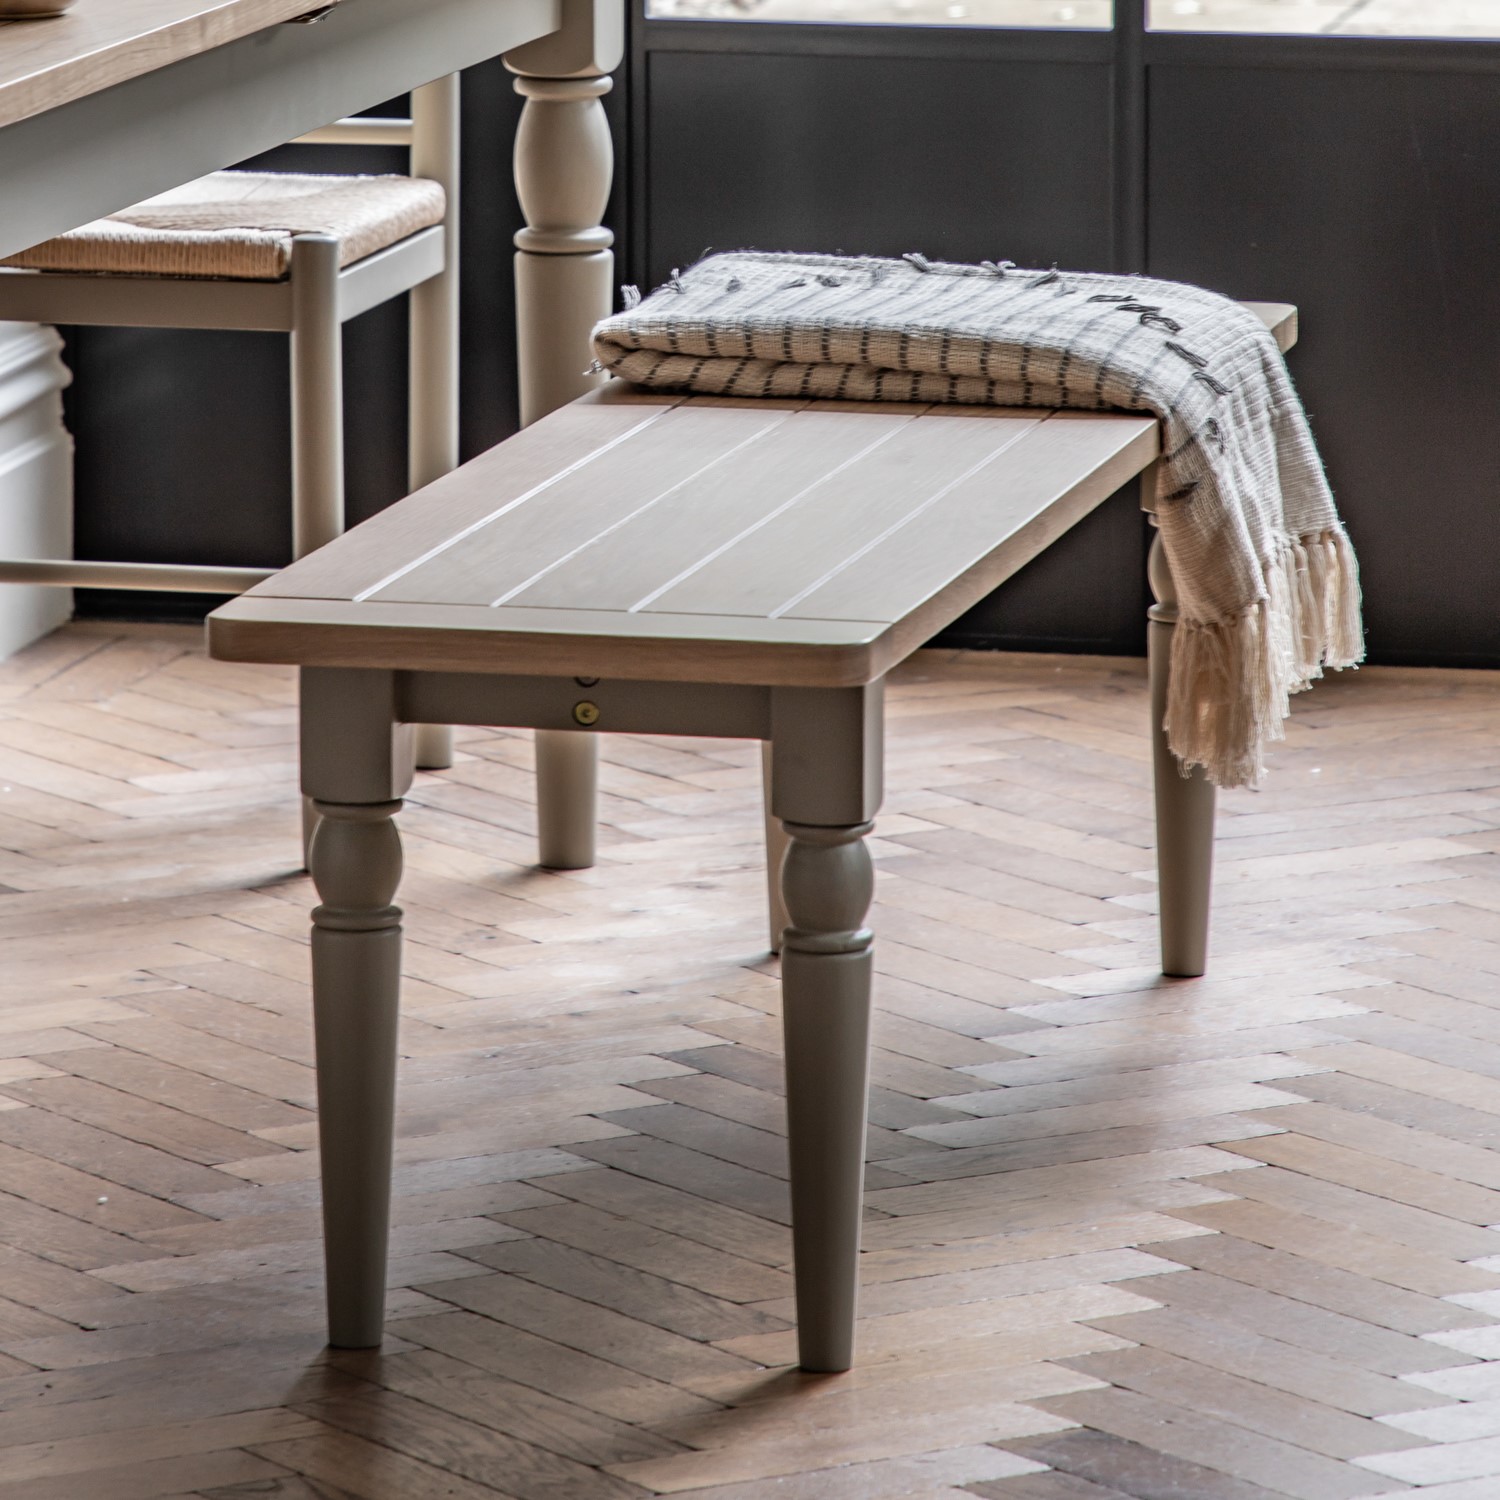 Read more about Eton dining bench sage green caspian house